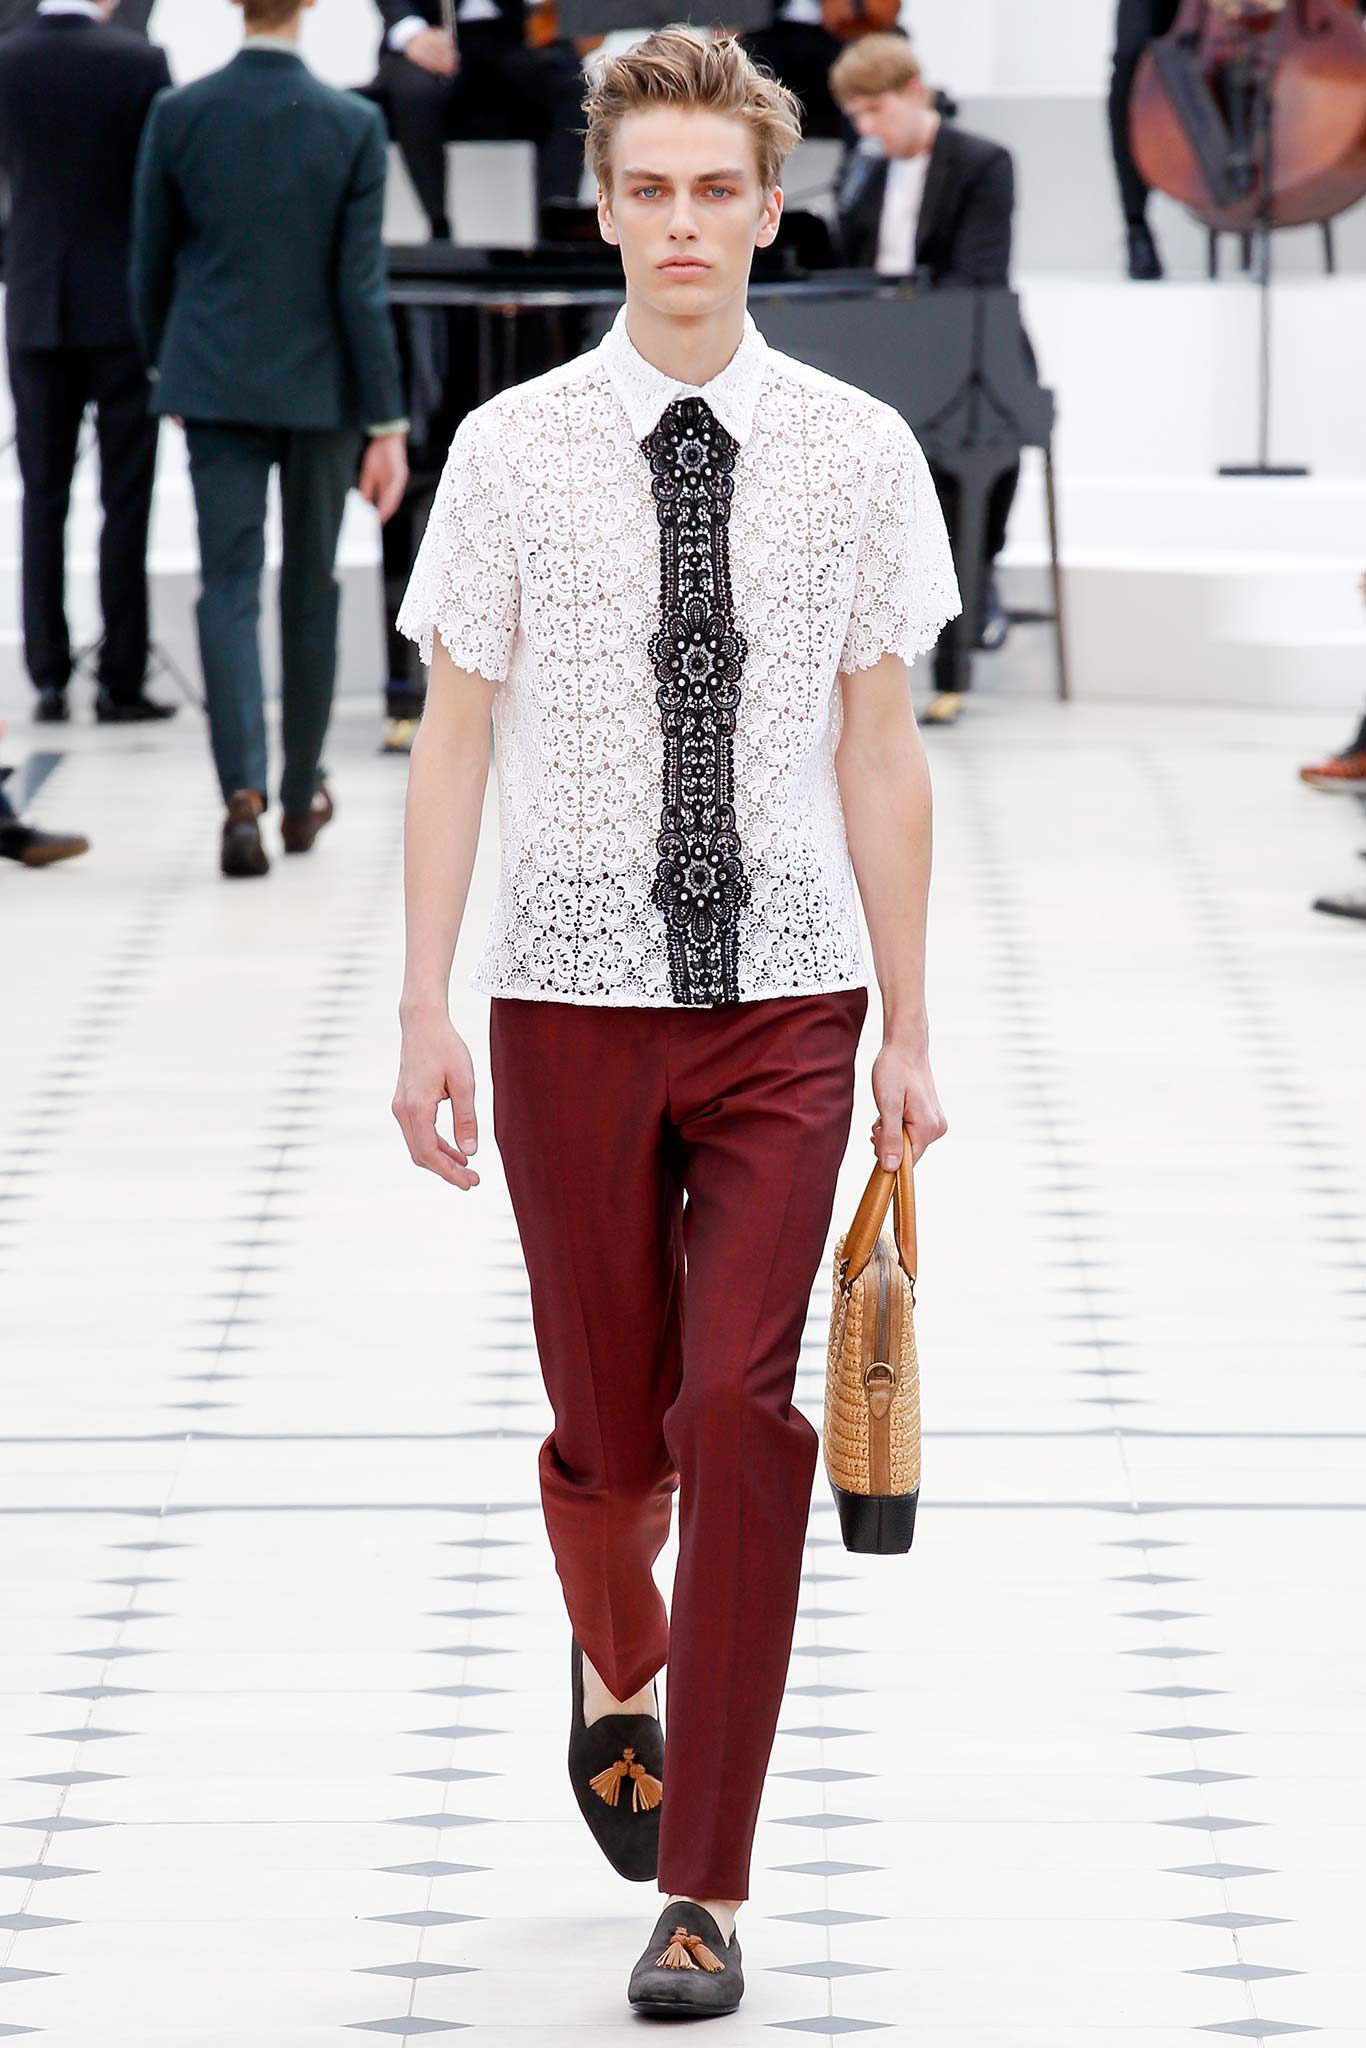 spring-2016-menswear-trends-01-lace-03